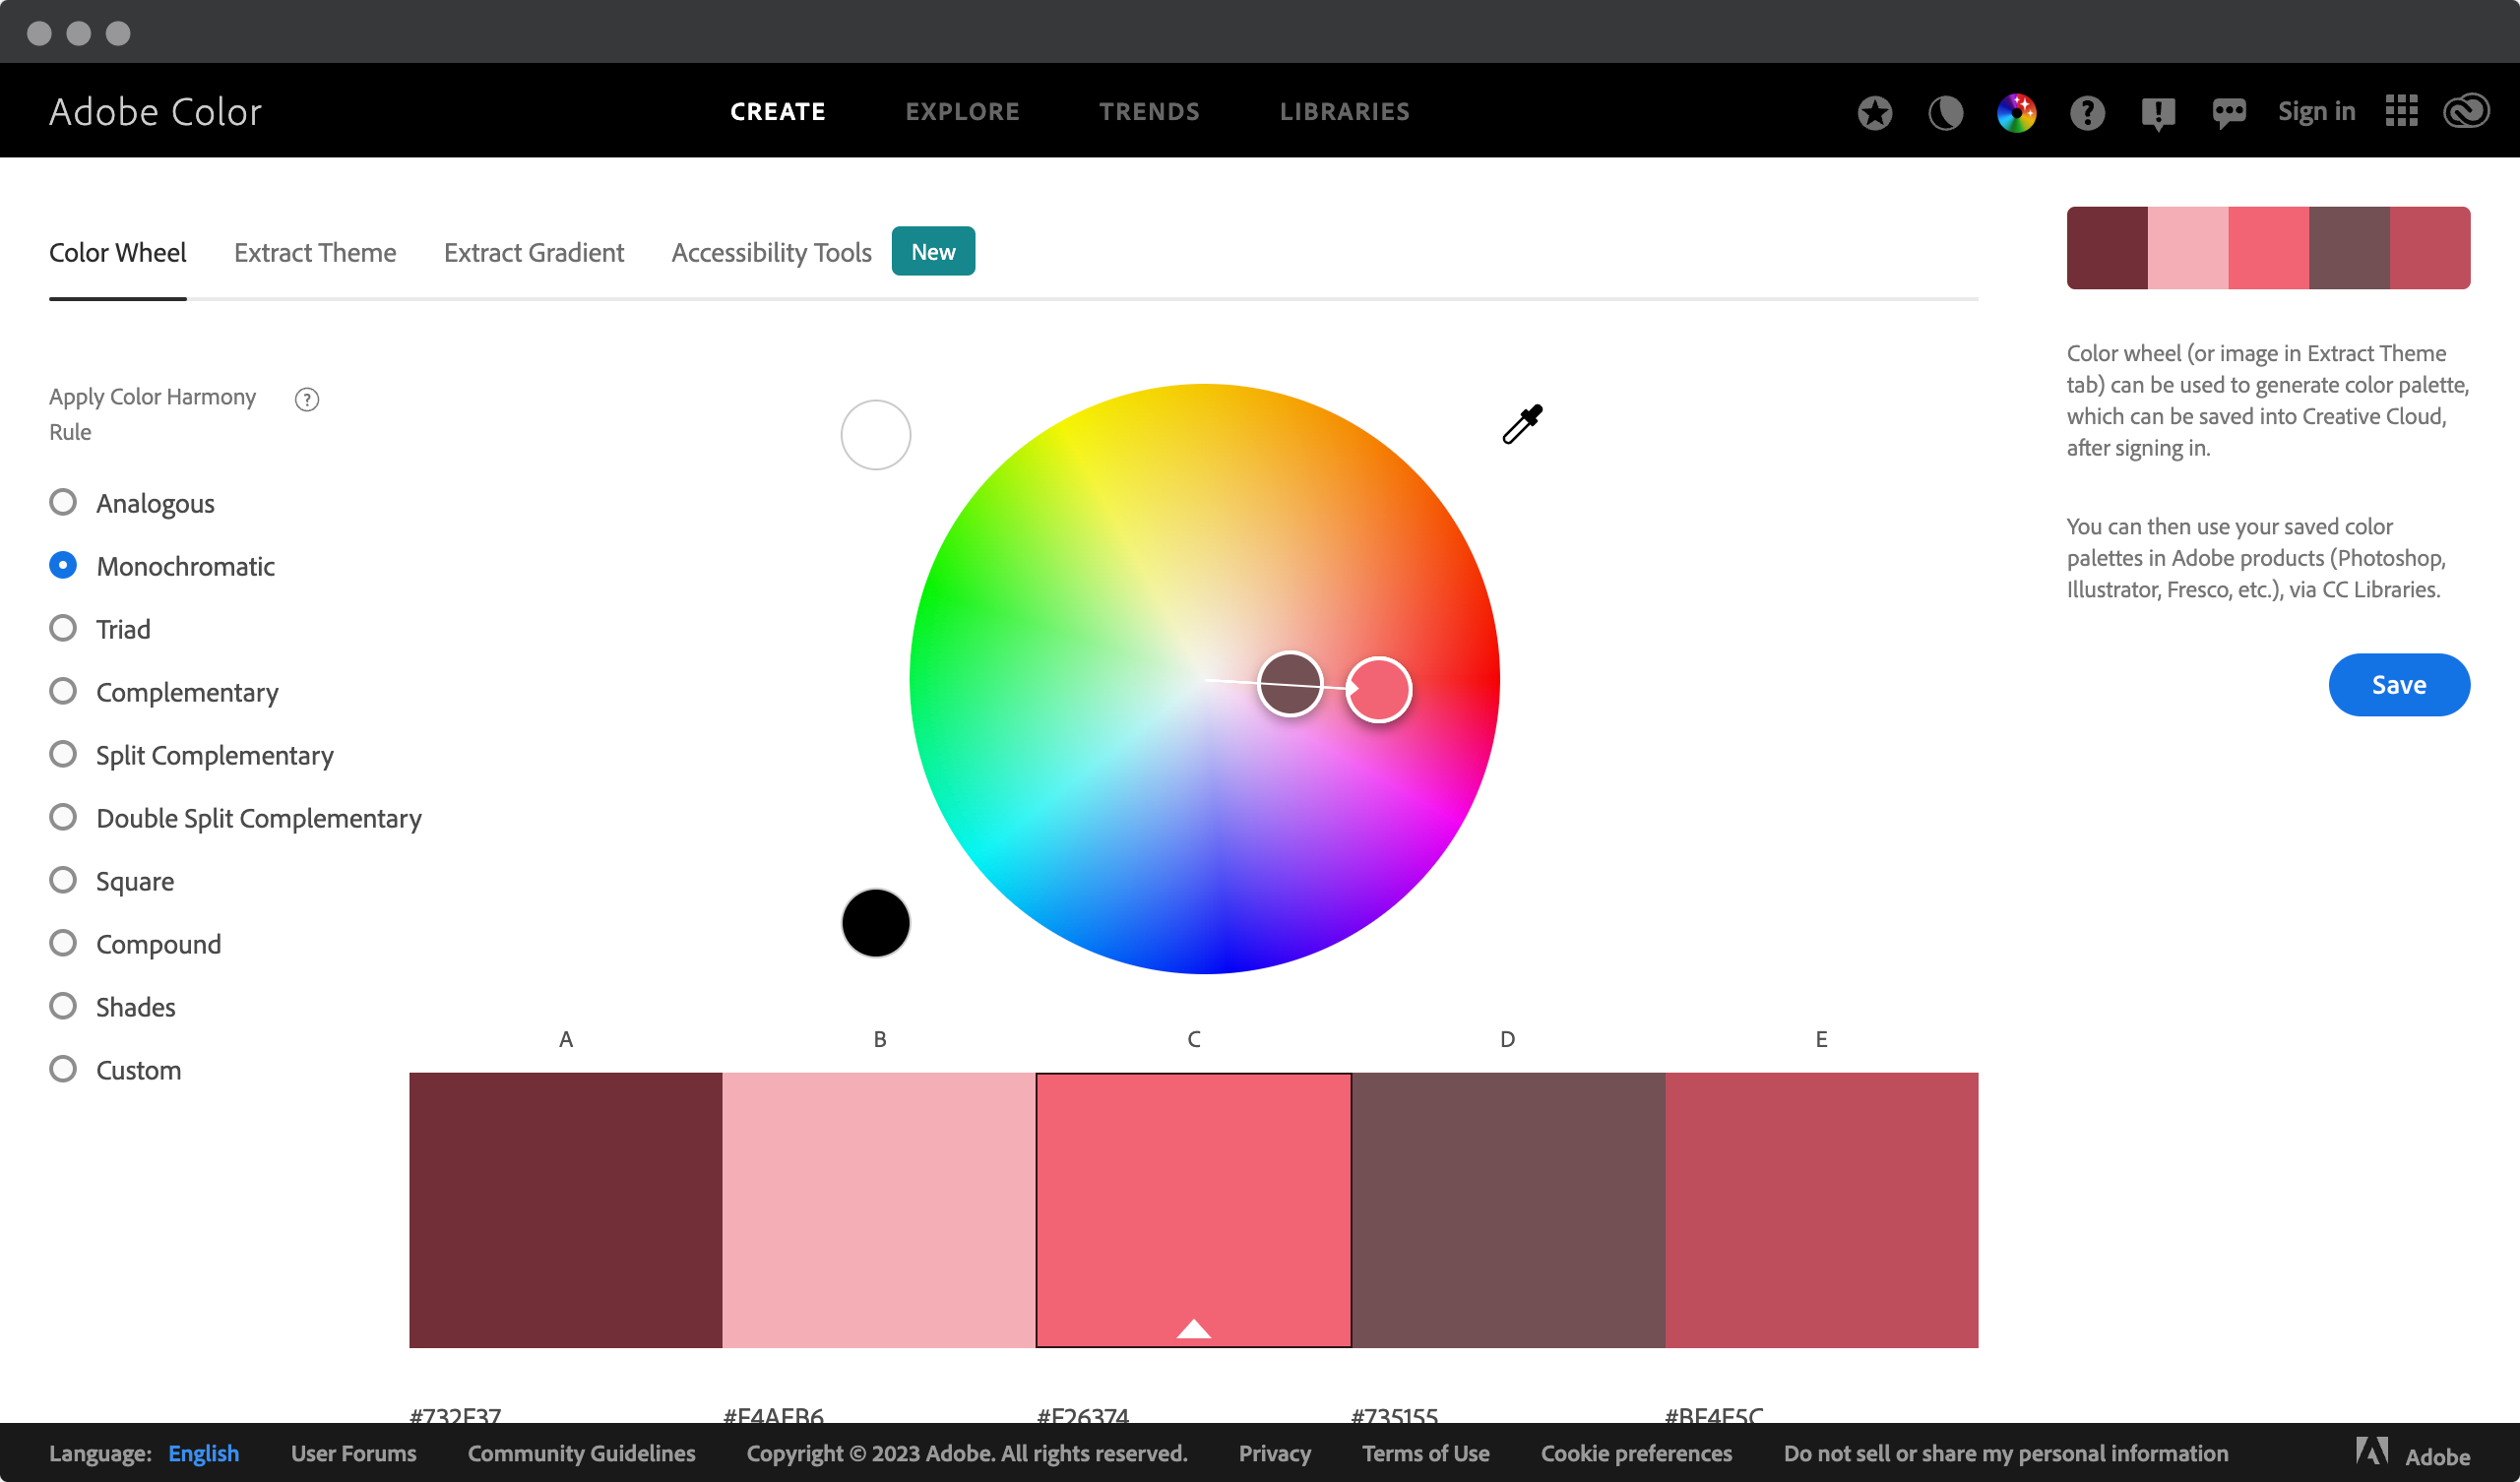 Screenshot of a Web page showing the monochromatic colors in Adobe Color Wheel tool